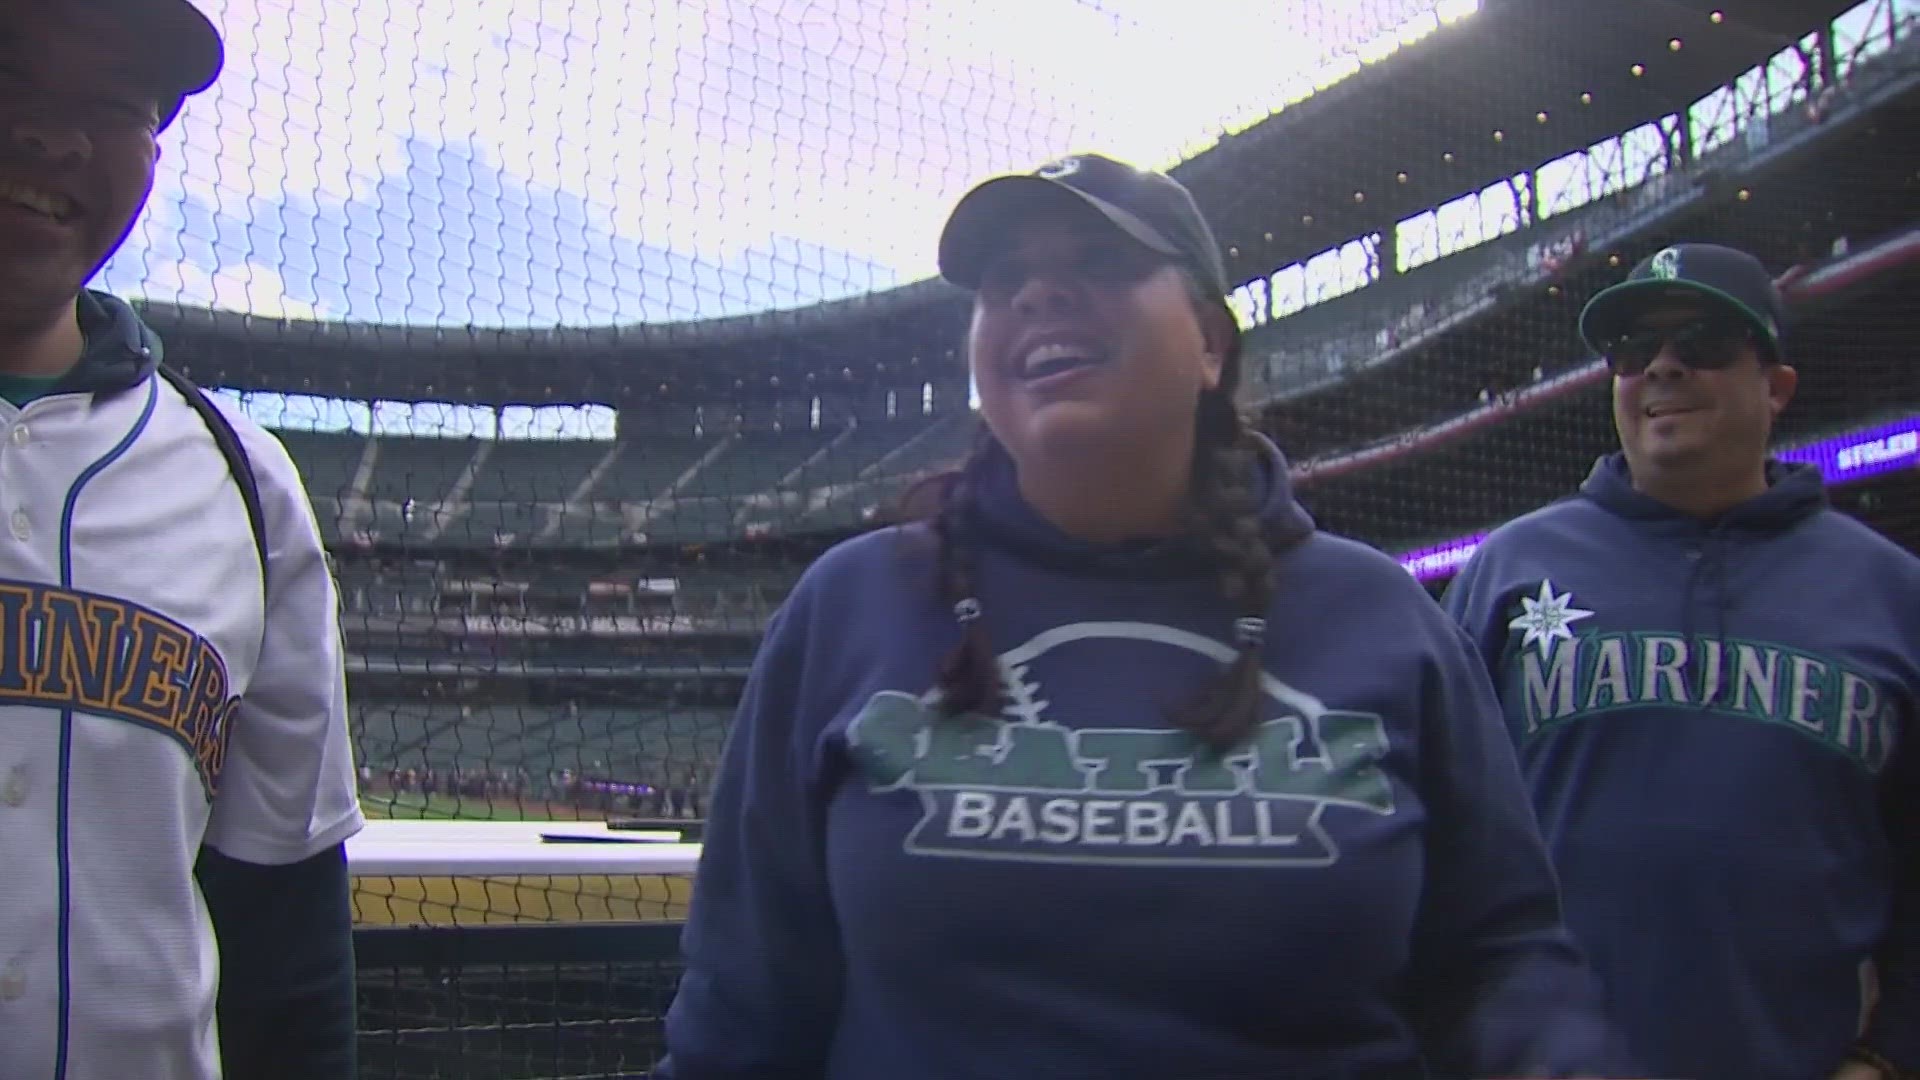 Die-hard Mariners fans say something about this season feels special - and they're hoping the M's go all the way.